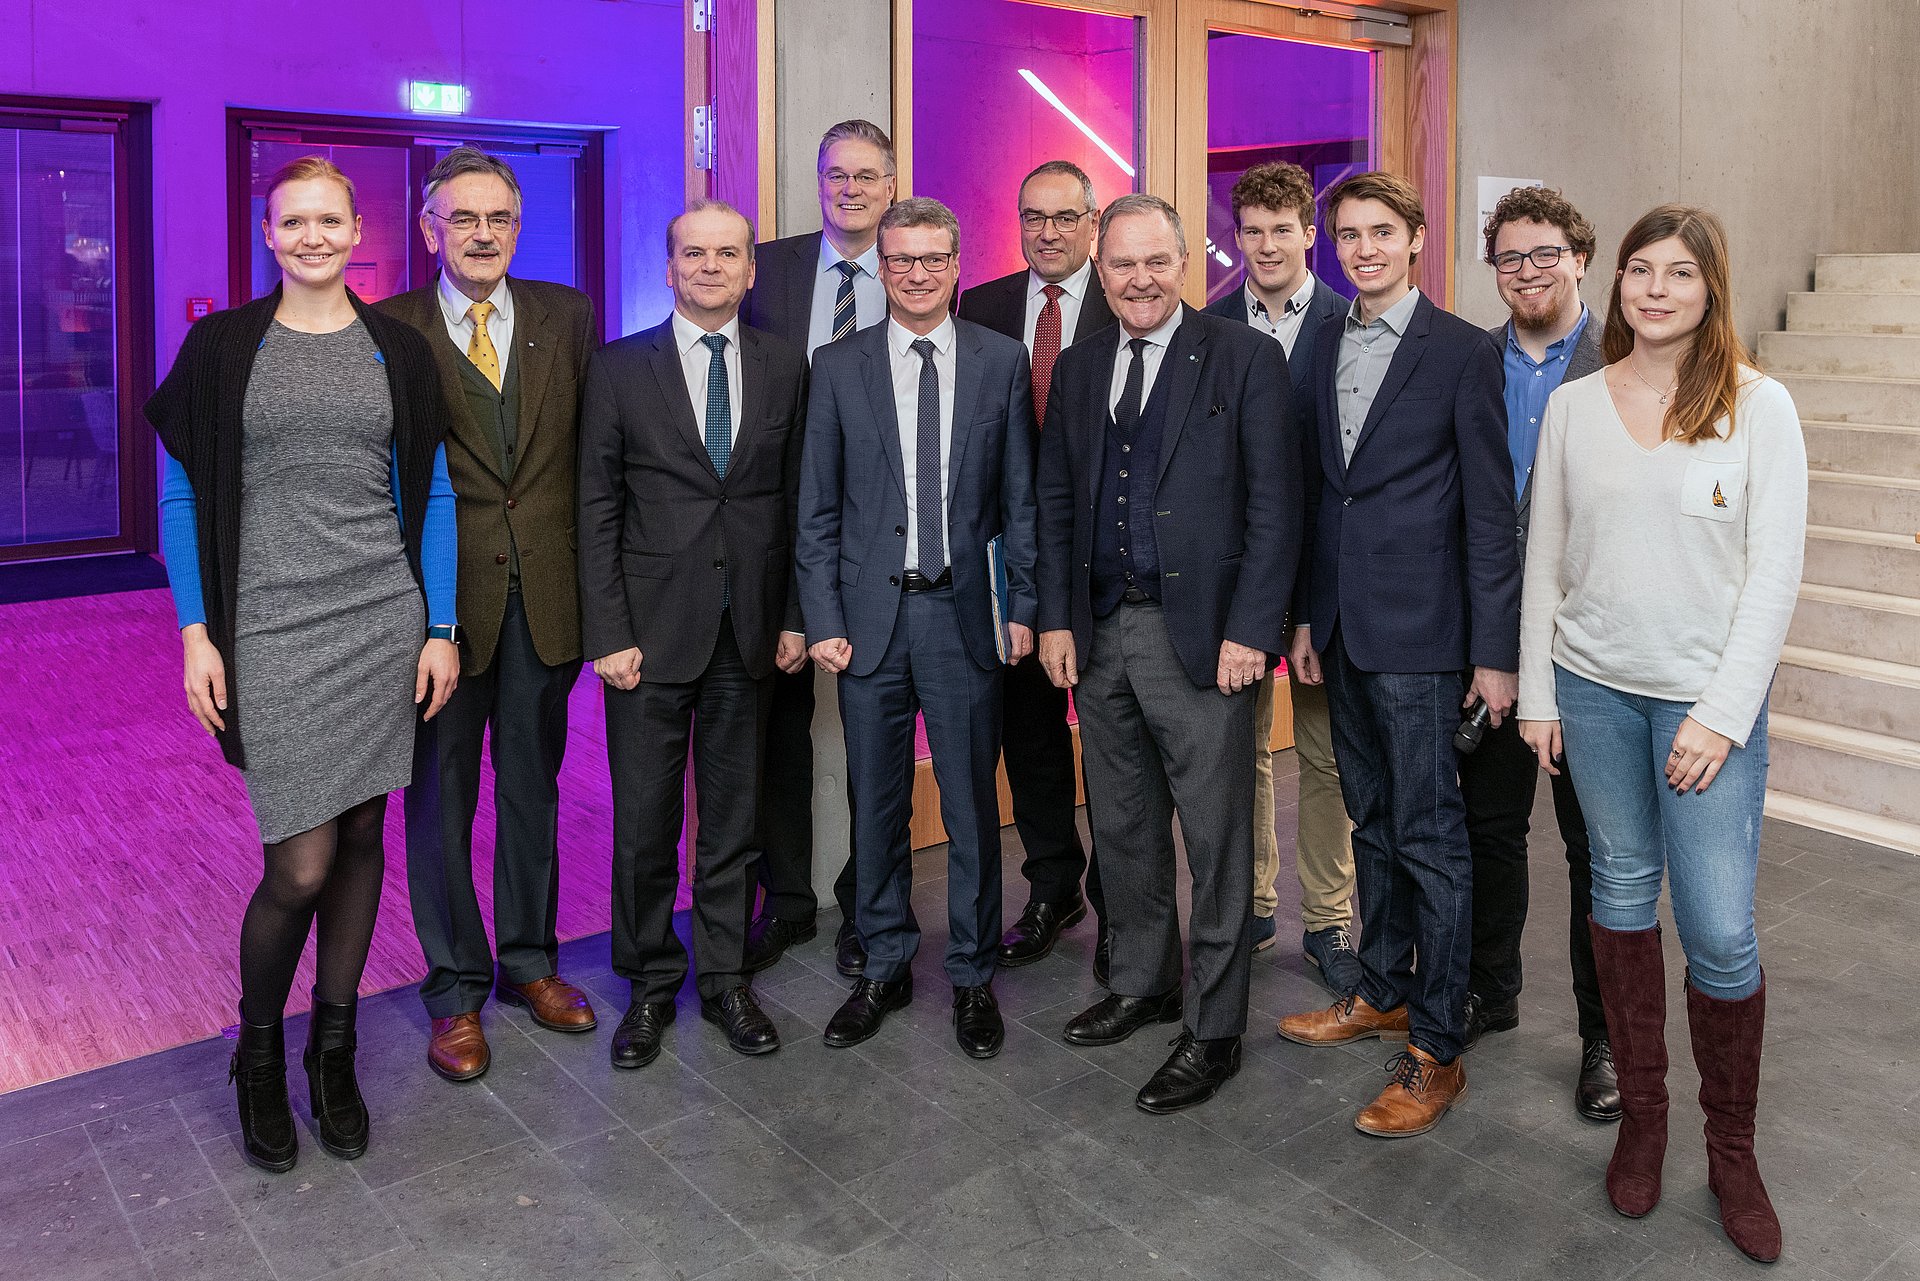 Ceremonial opening of the "StudiTUM" building in Garching with TUM President Wolfgang A. Herrmann (2nd from left) and Science Minister Bernd Sibler (5th from left). (Picture: Heddergott)